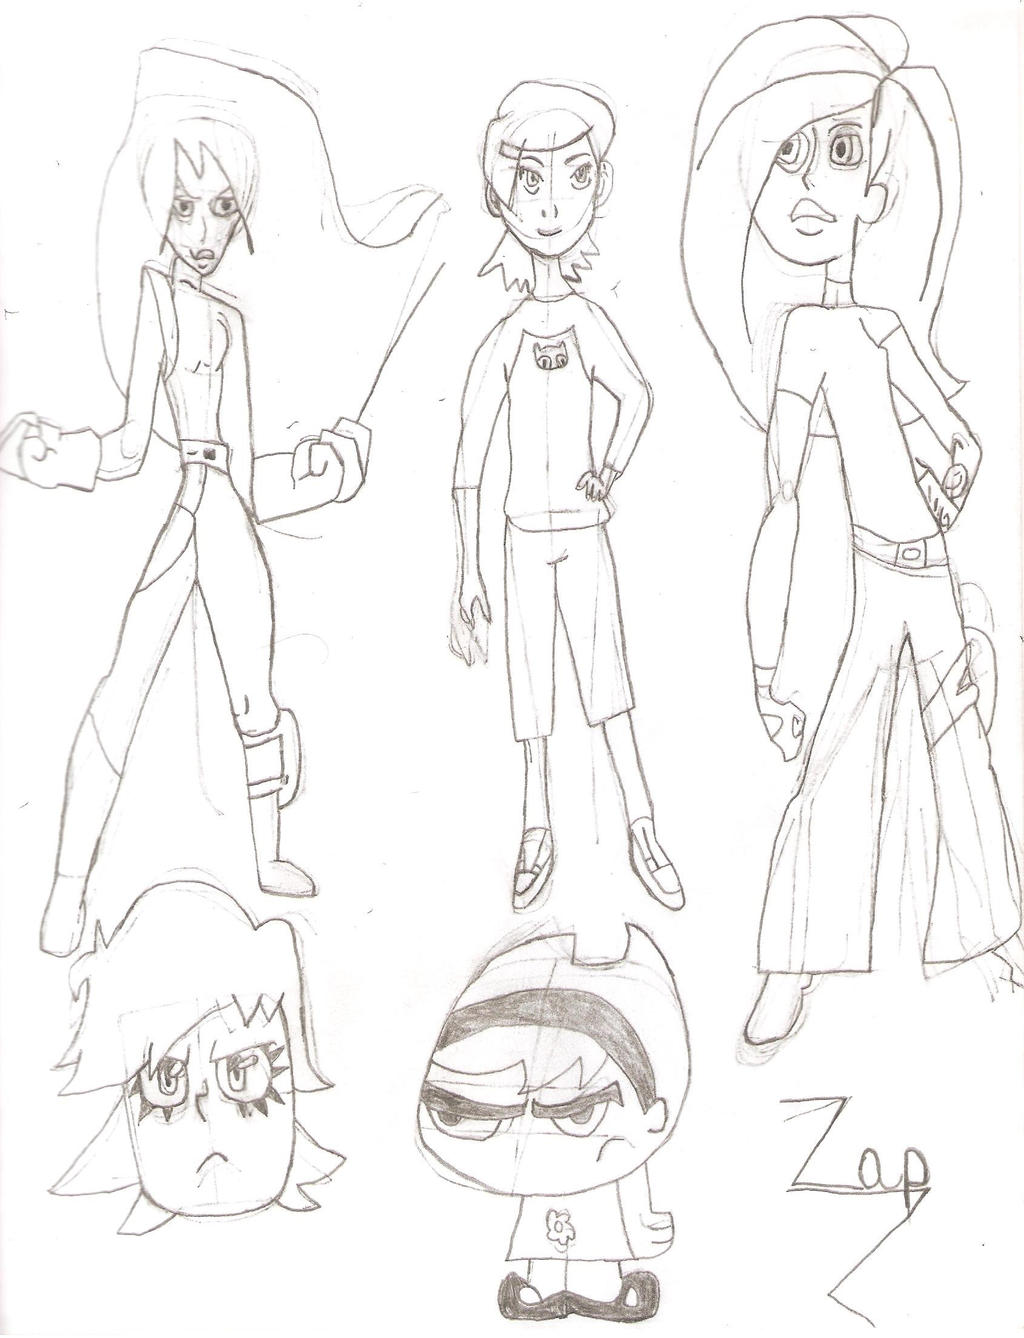 Toon Girl Sketches 3 by Zap1992 on DeviantArt